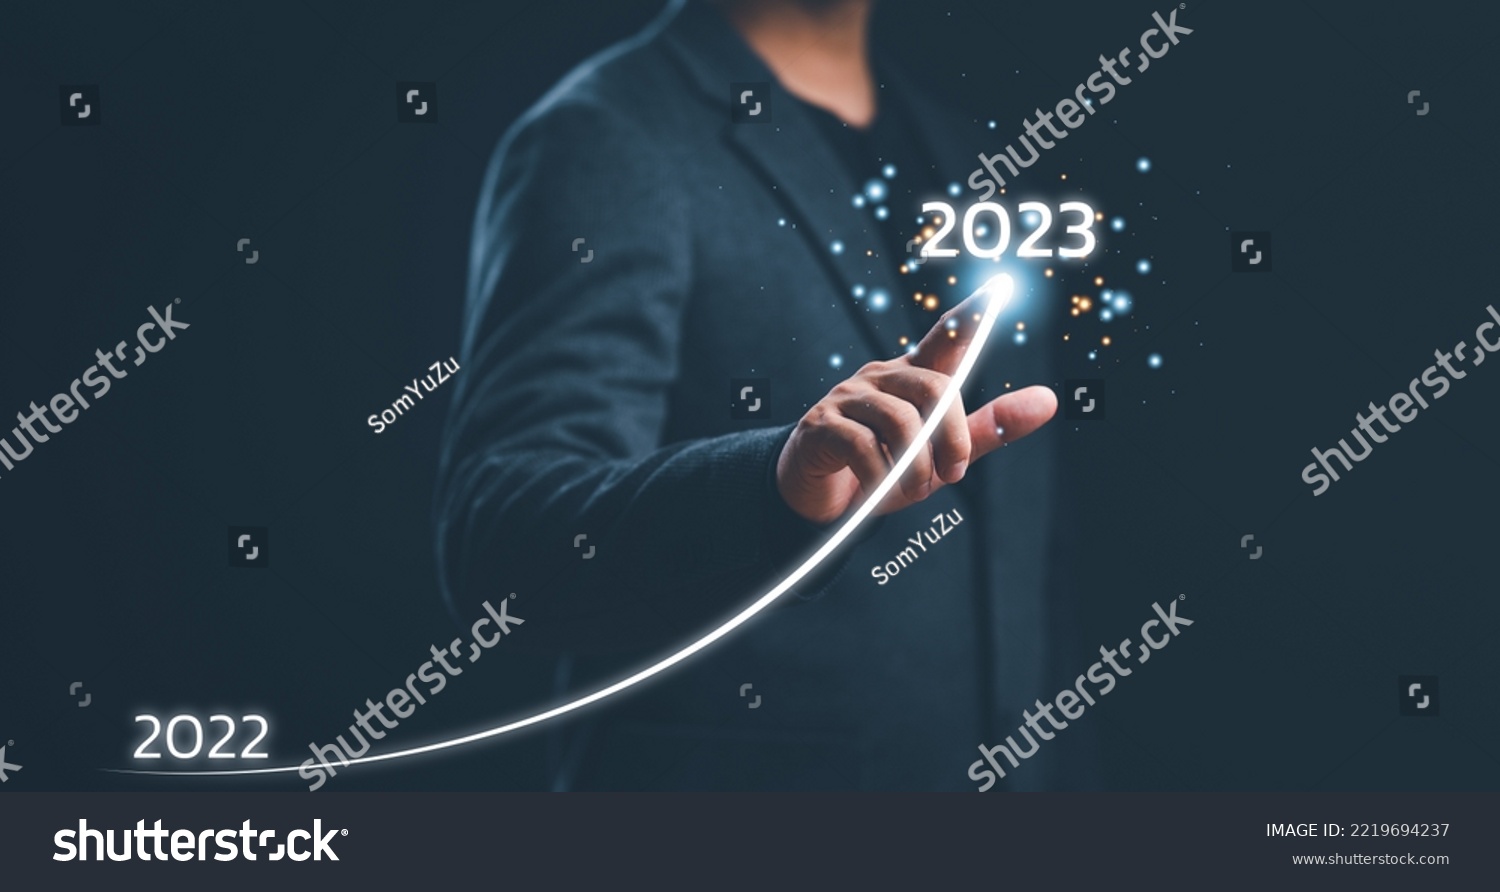 Businessman hand drawing line for increasing arrow from 2022 to 2023 for preparation merry Christmas and happy new year concept. new business, start up on new years. #2219694237